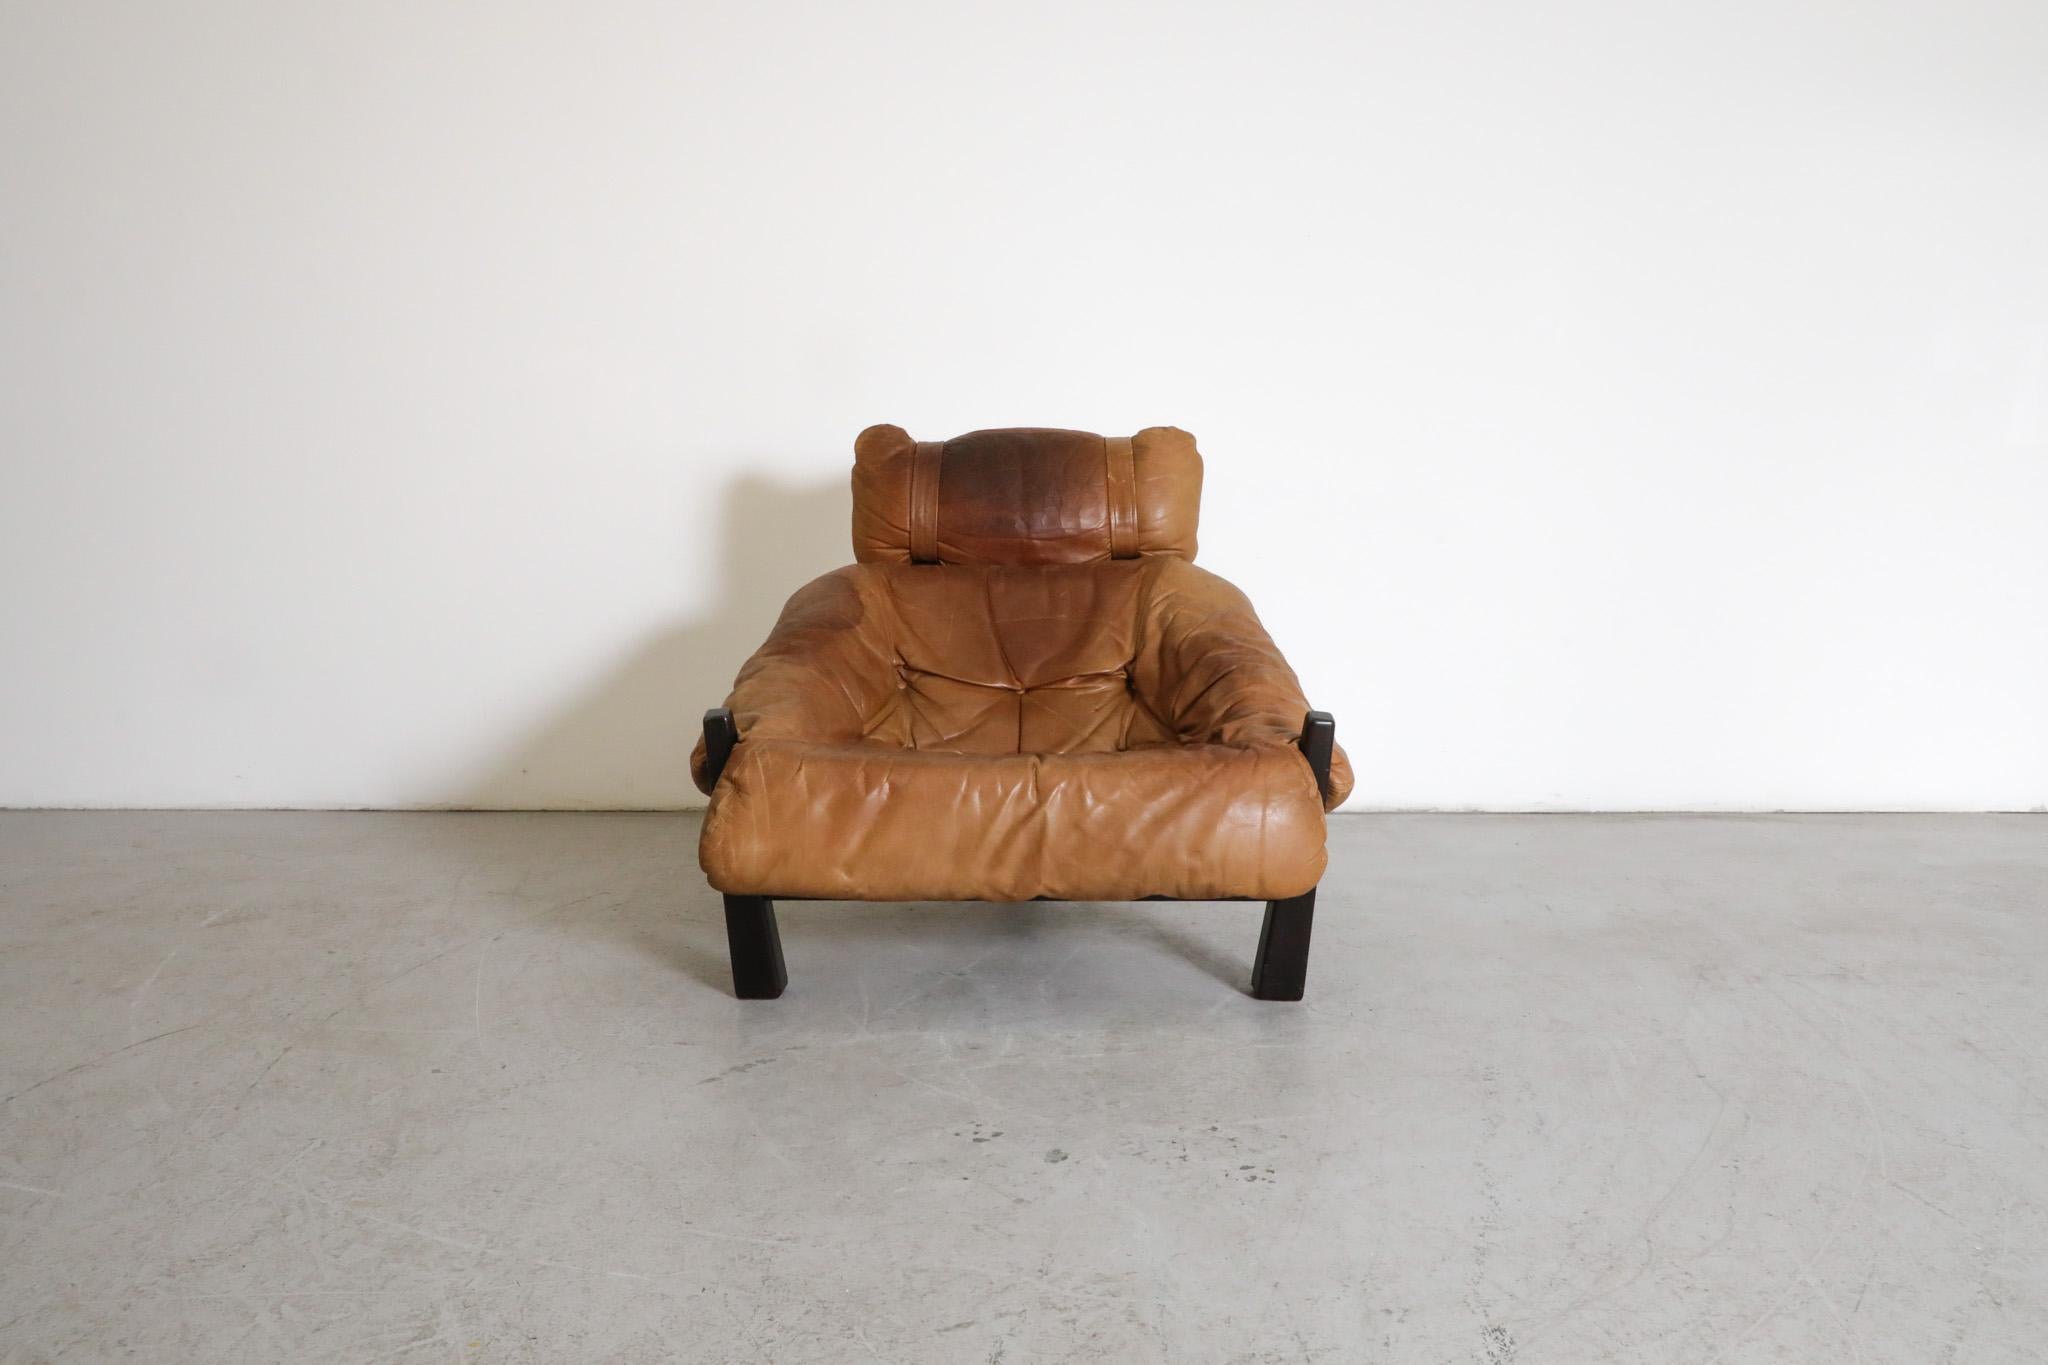 Mid-Century leather lounge chair designed by Gerard Van Den Berg for Montis. Dark stained oak frame with tripod legs supports the leather bucket seat cushion and headrest. In original condition with heavy visible wear consistent with its age and